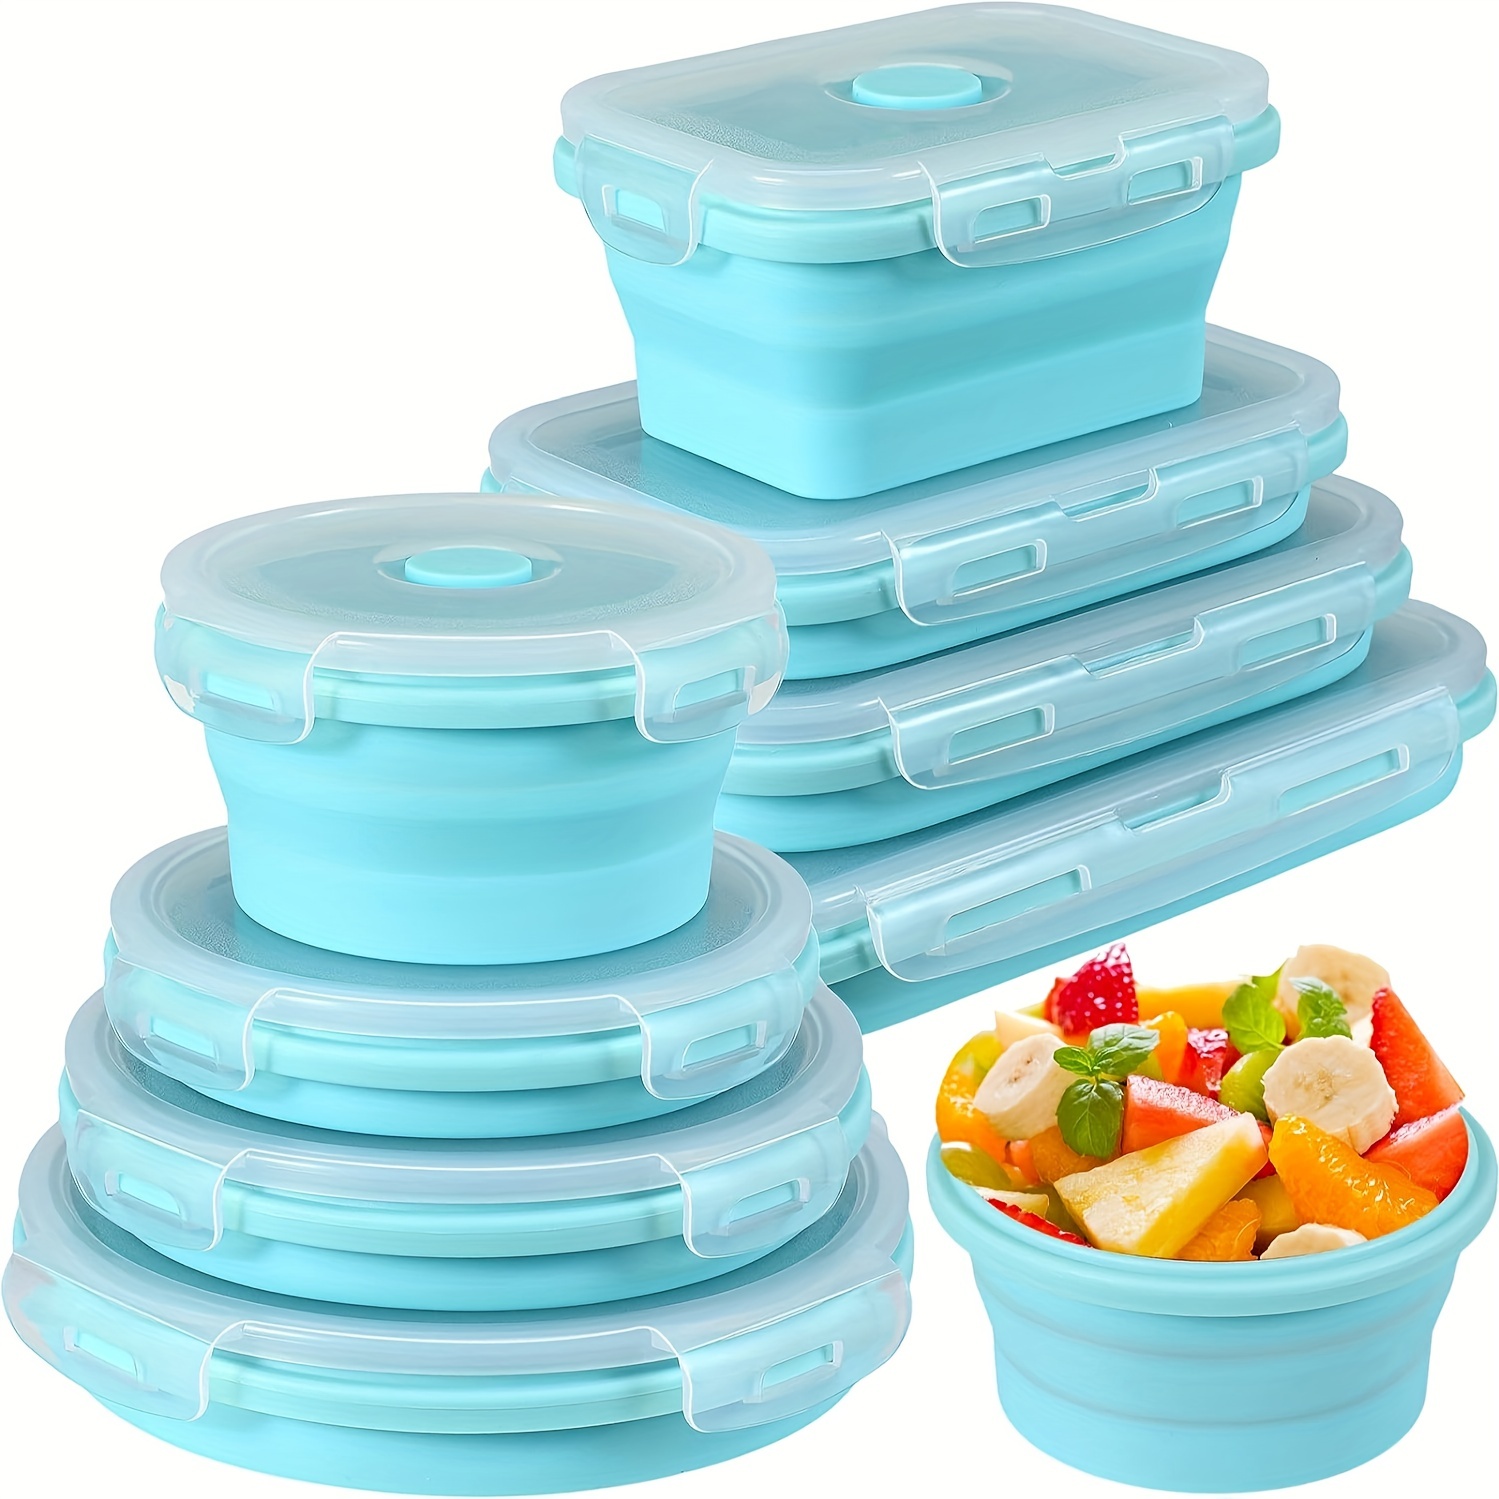 4pcs/set Collapsible Food Storage Containers with Lids Portable Silicone Folding Food Box Microwave Freezer Safe